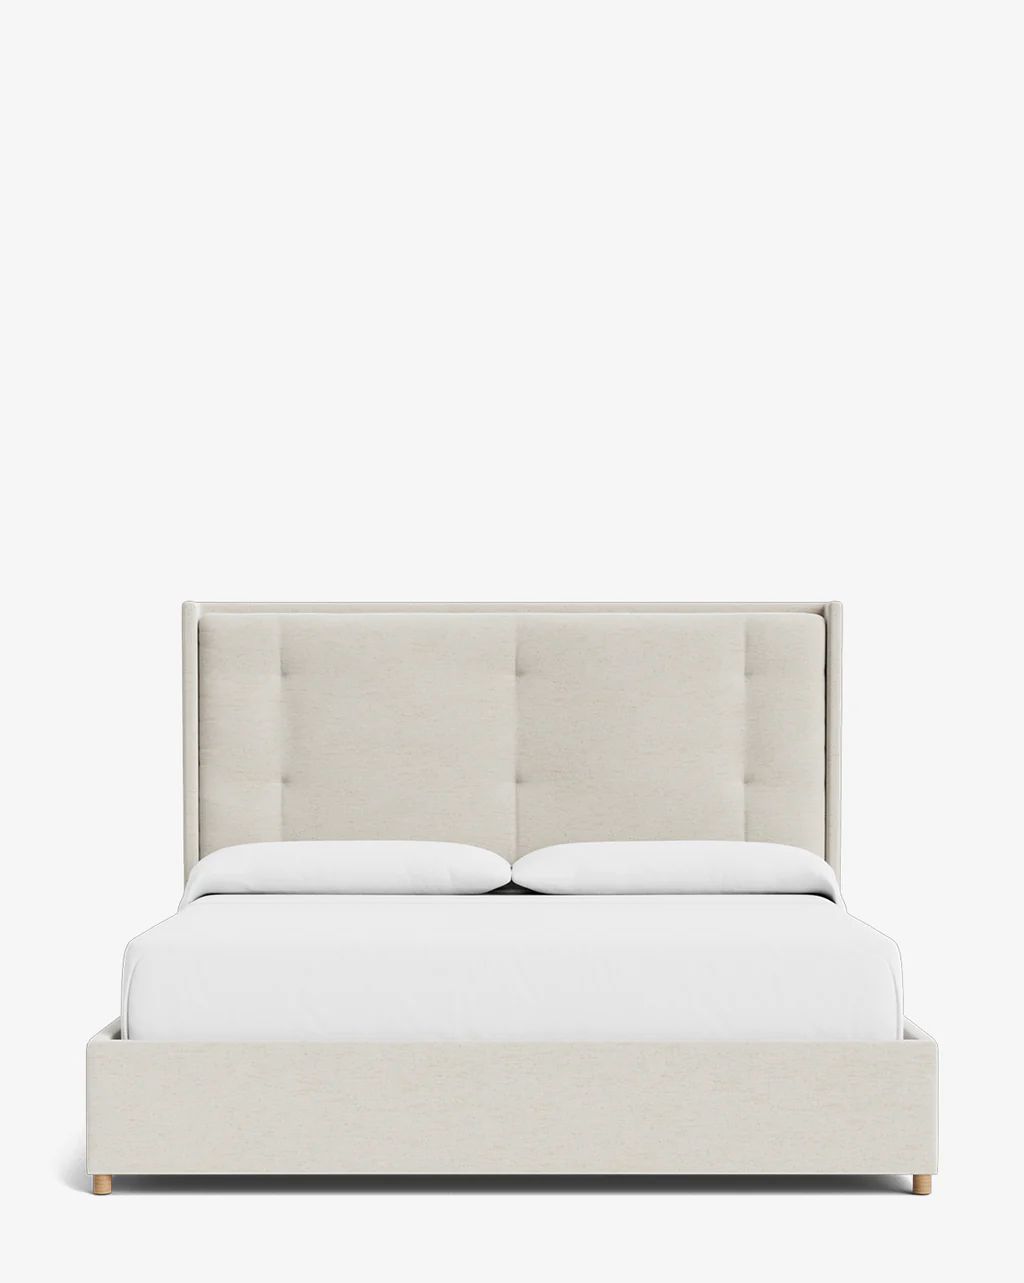 Ria Bed | McGee & Co.